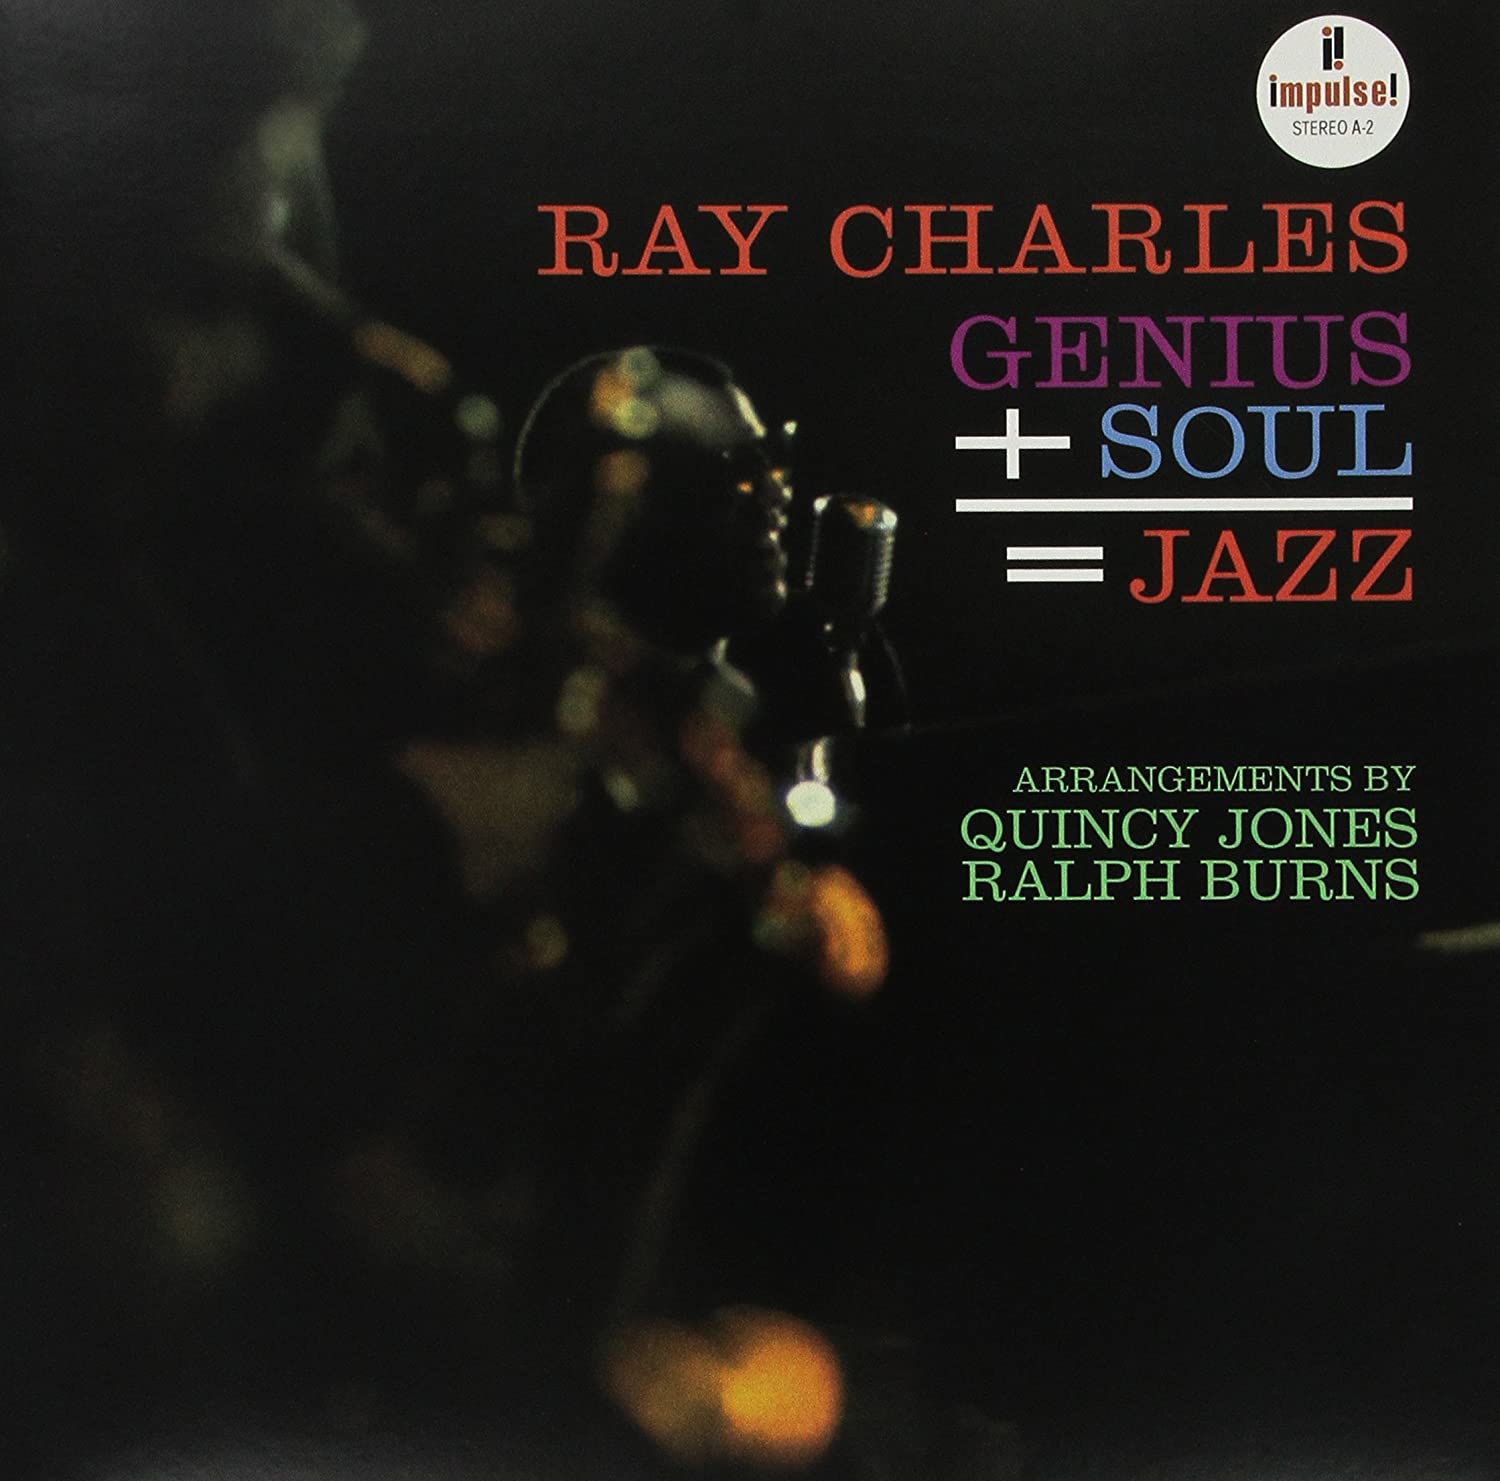 Ray Charles "Genius + Soul = Jazz" [All Analog 180g Reissue Vinyl] [Verve Acoustic Sounds Series]